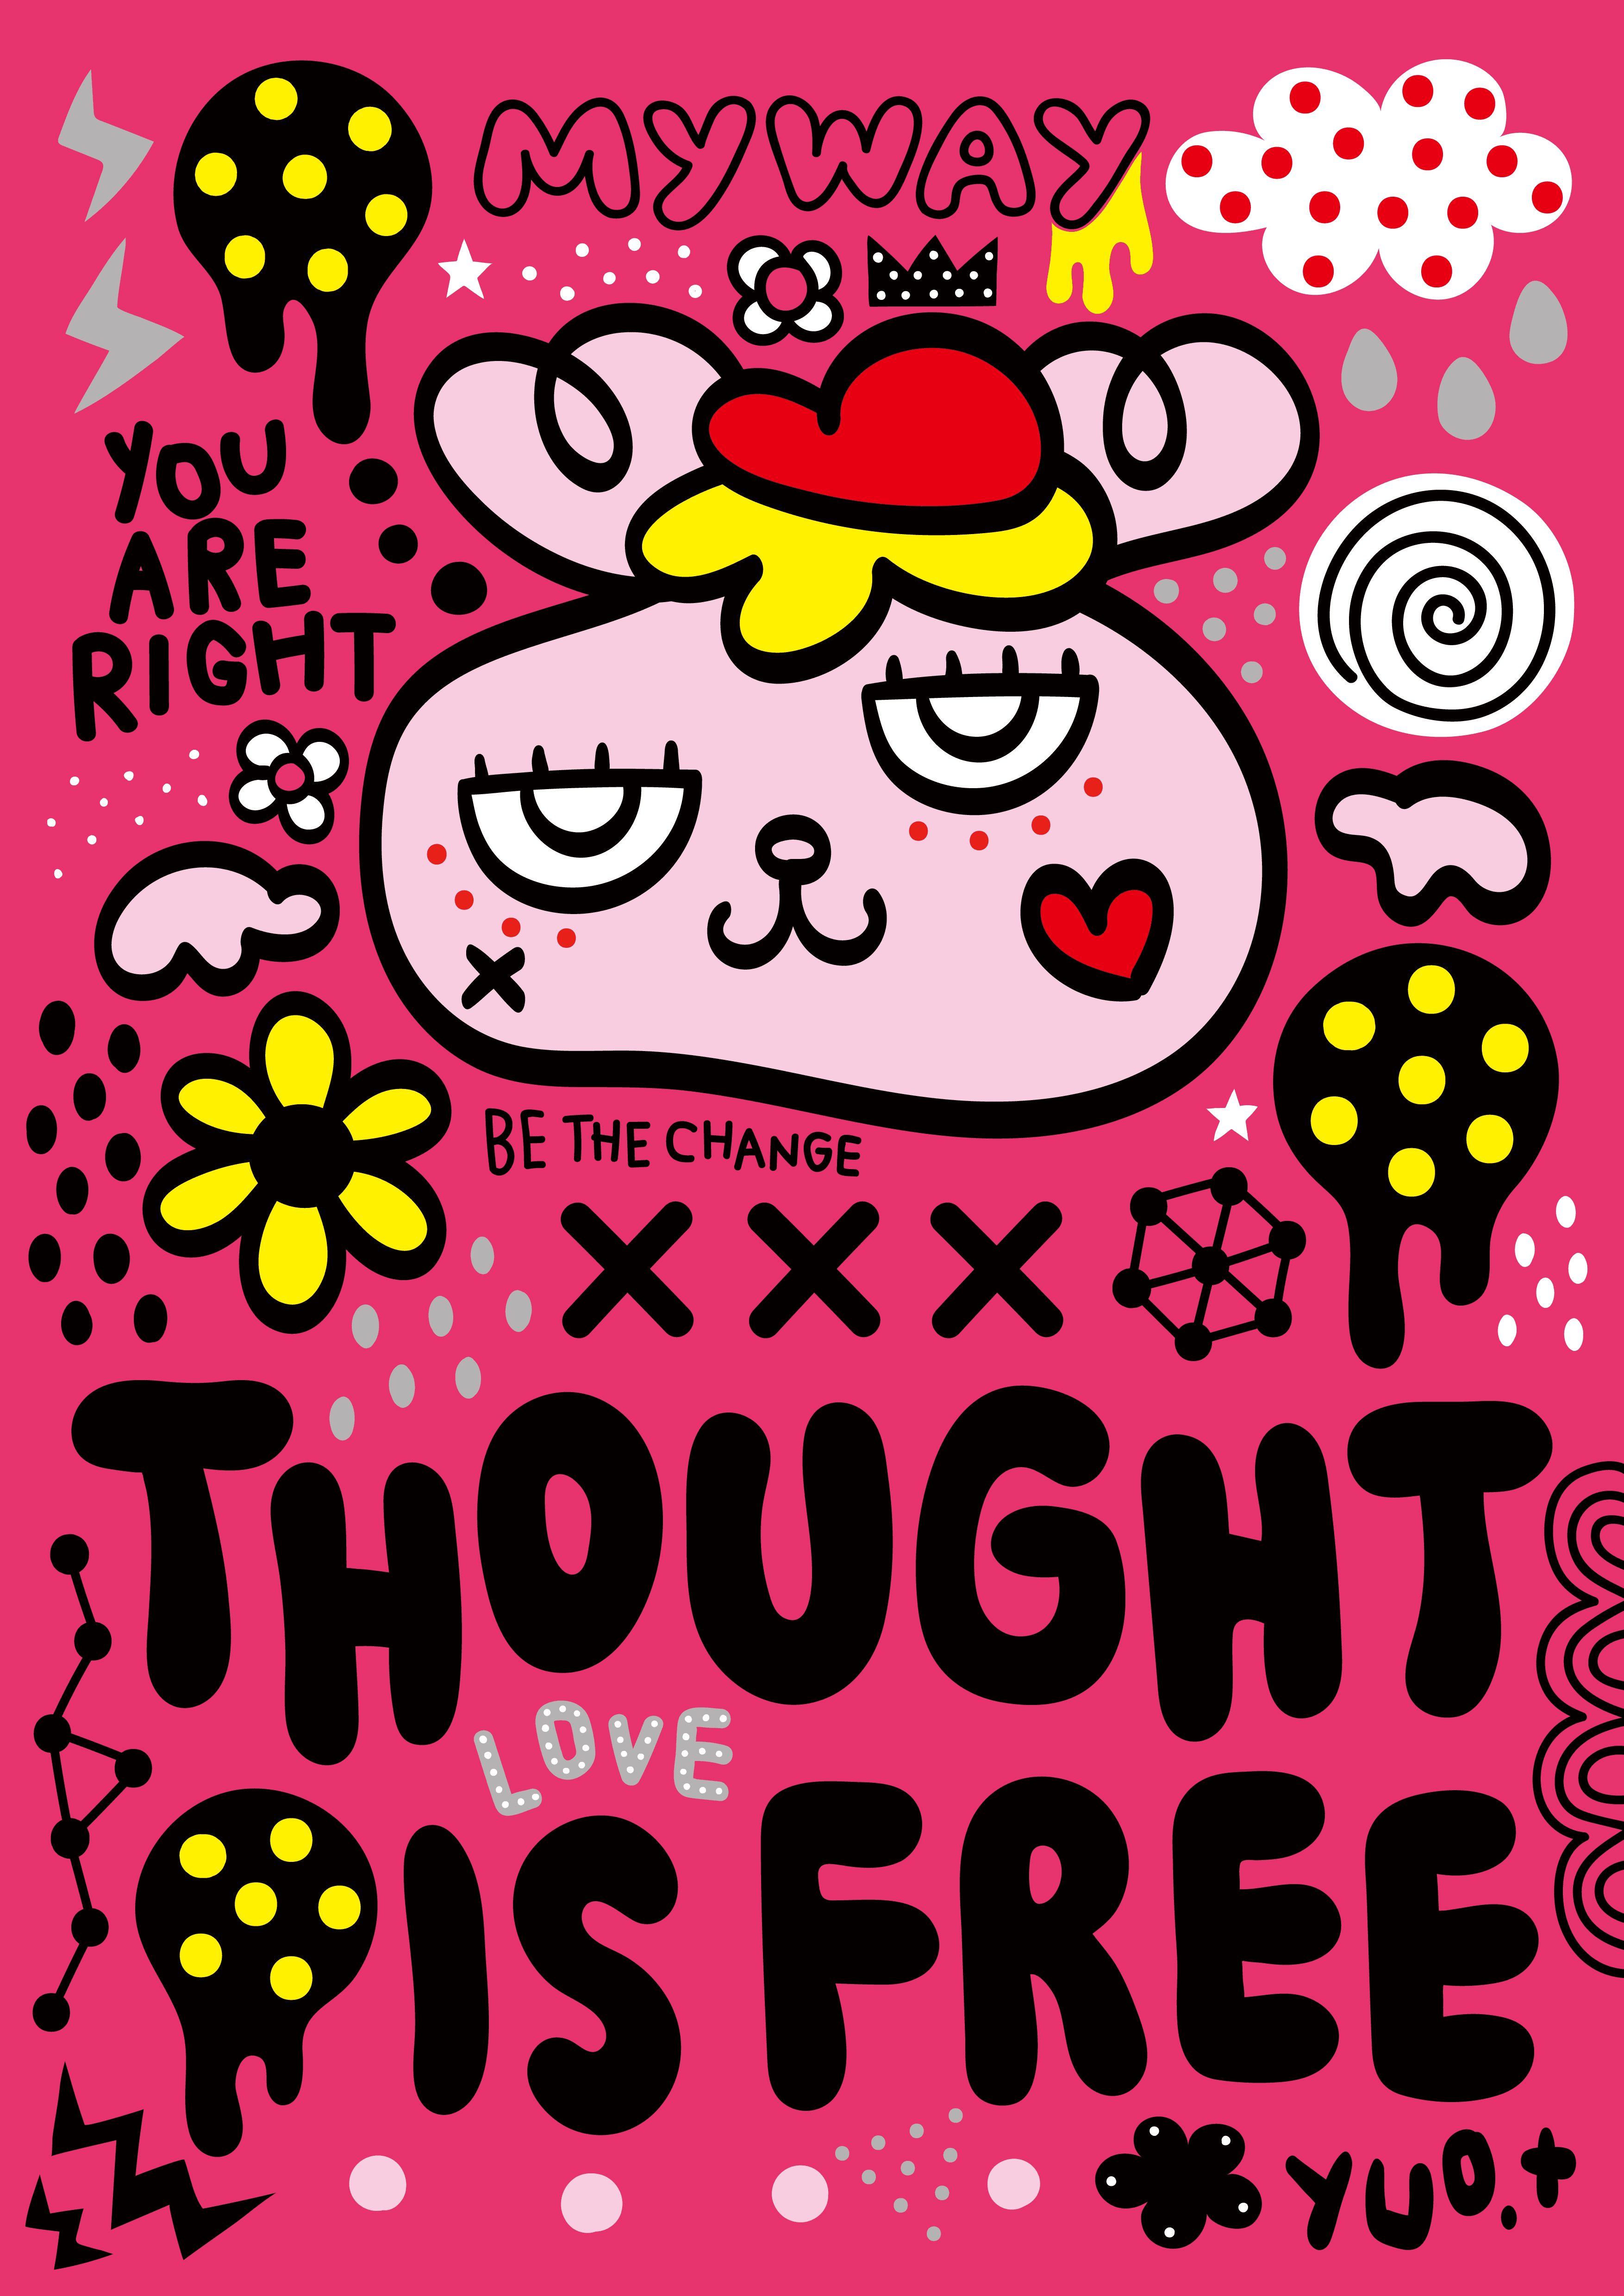 THOUGHT IS FREE